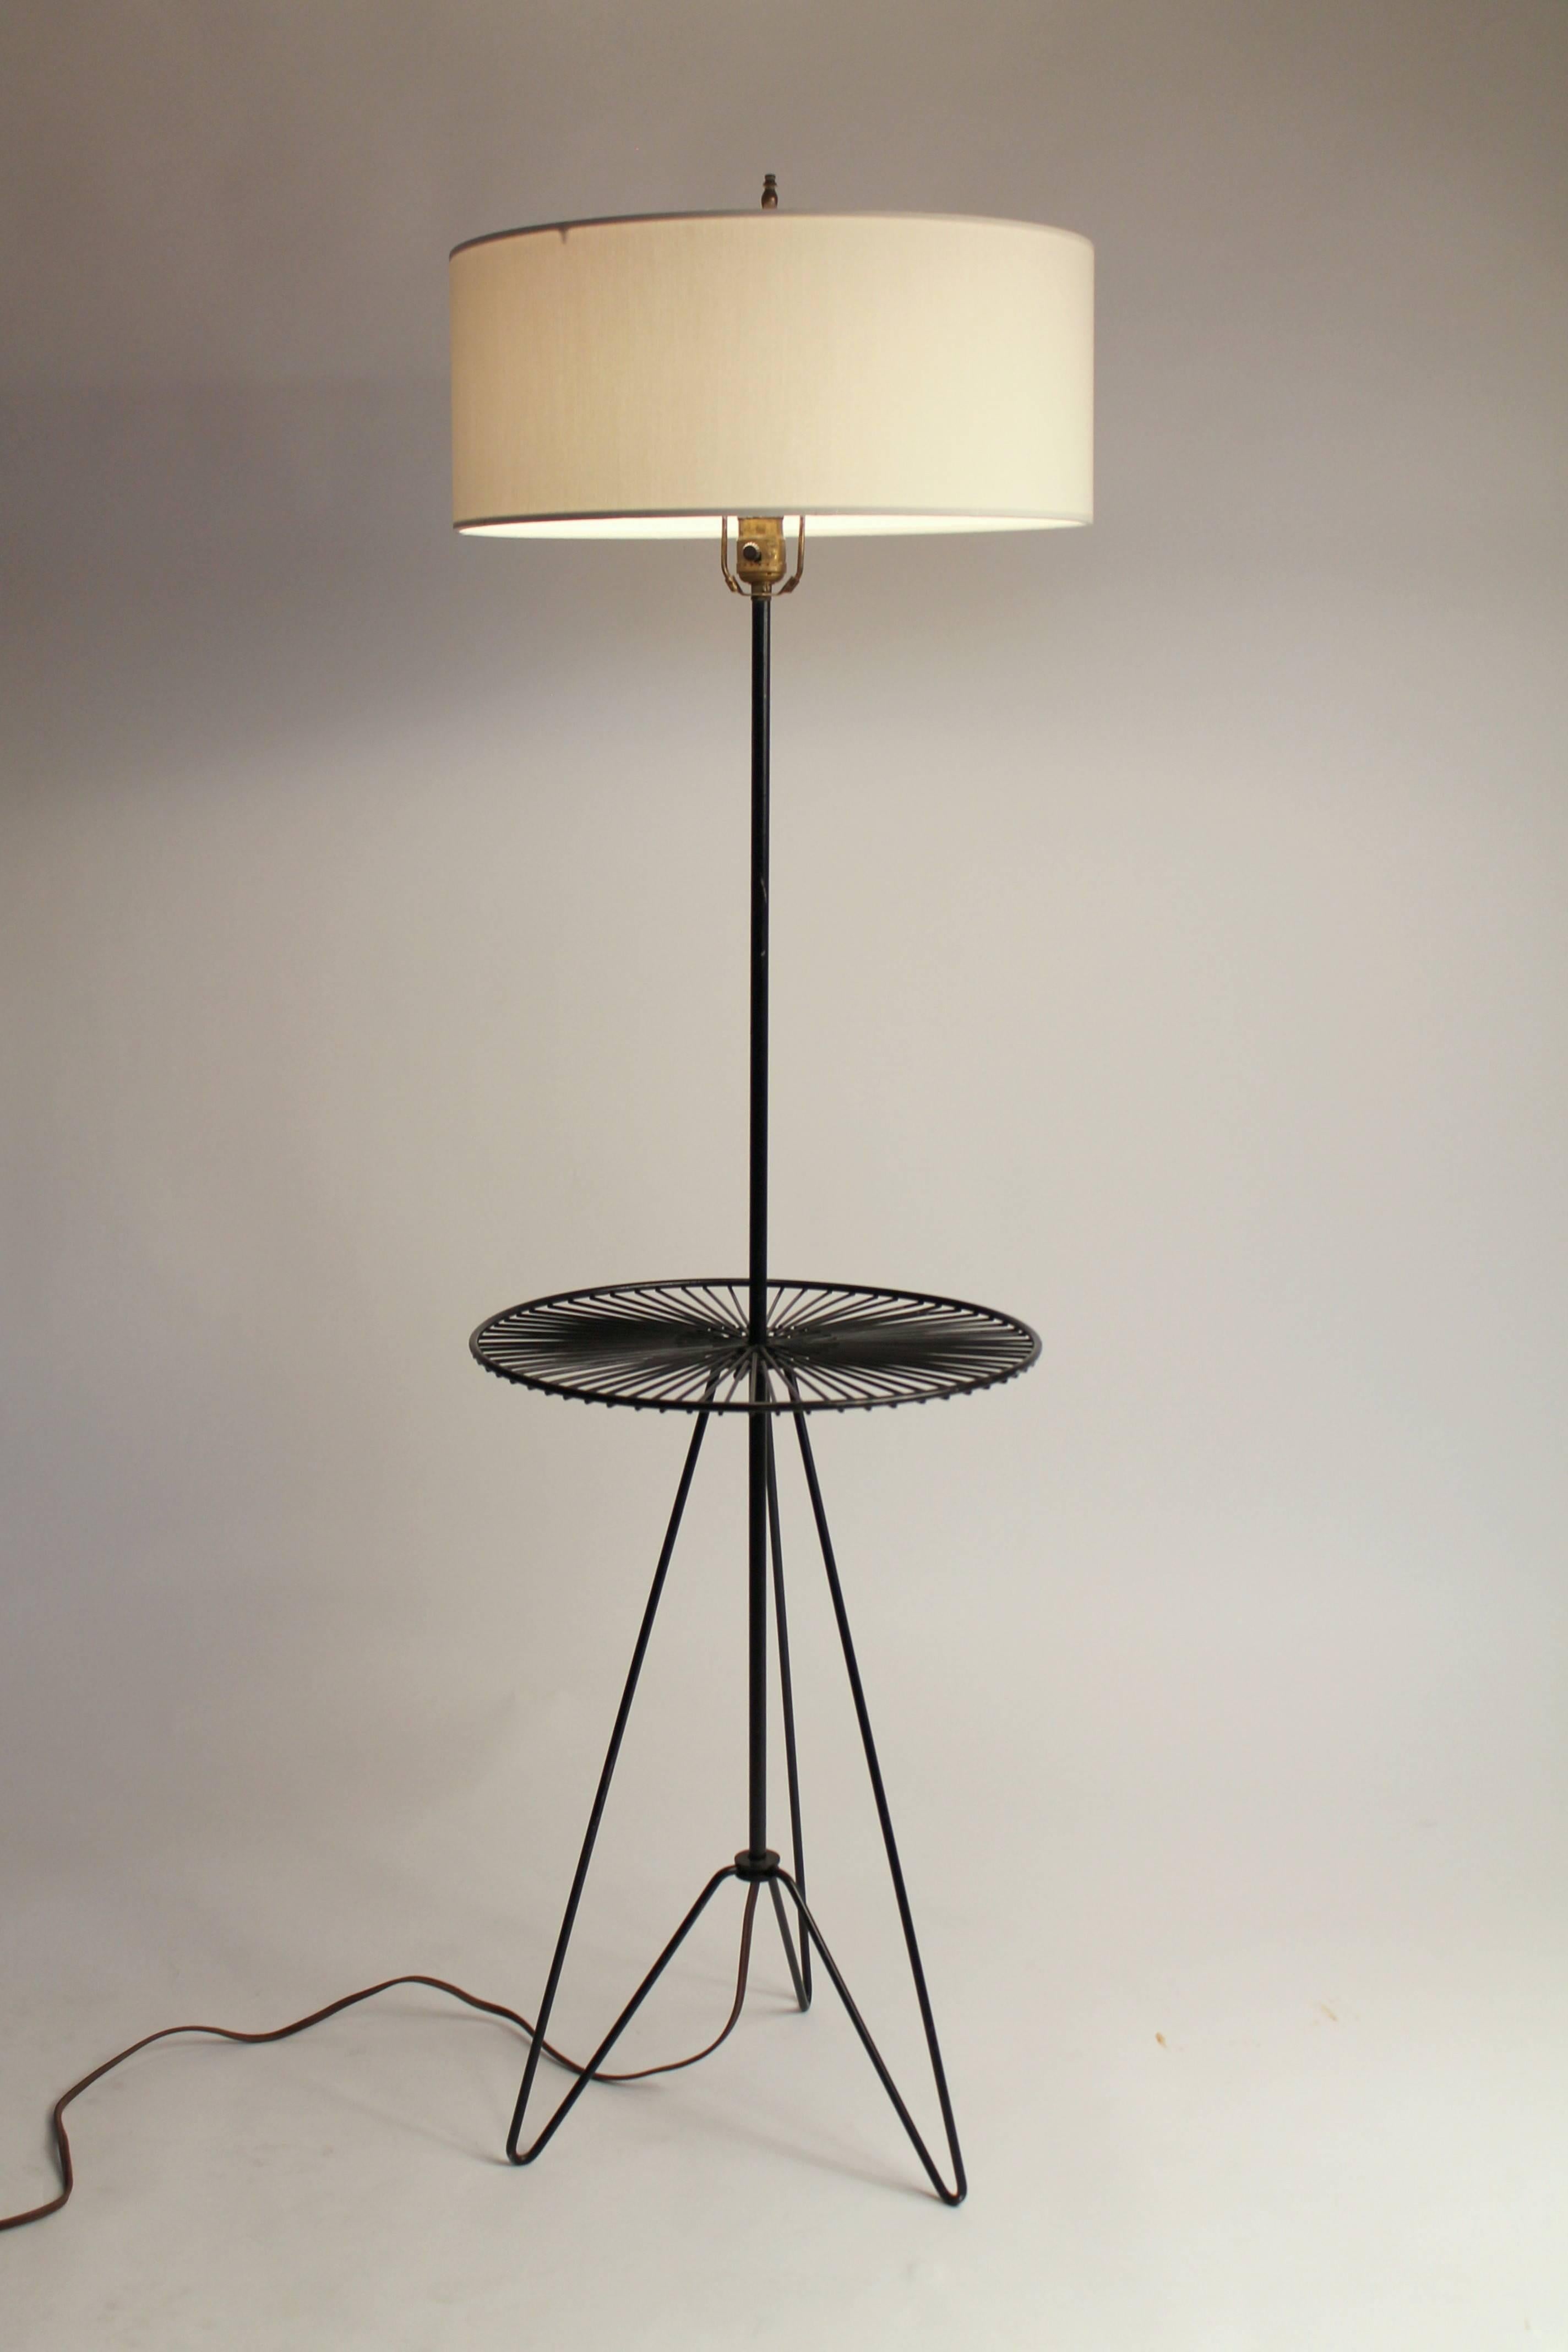 This minimalist 1950s floor lamp design is quite elegant and practical with its small table welded on the stem. 

Enameled iron wire.

Well made, superb assembly, extremely sturdy.

Measures: 55 inches to finial, table is 16 inches